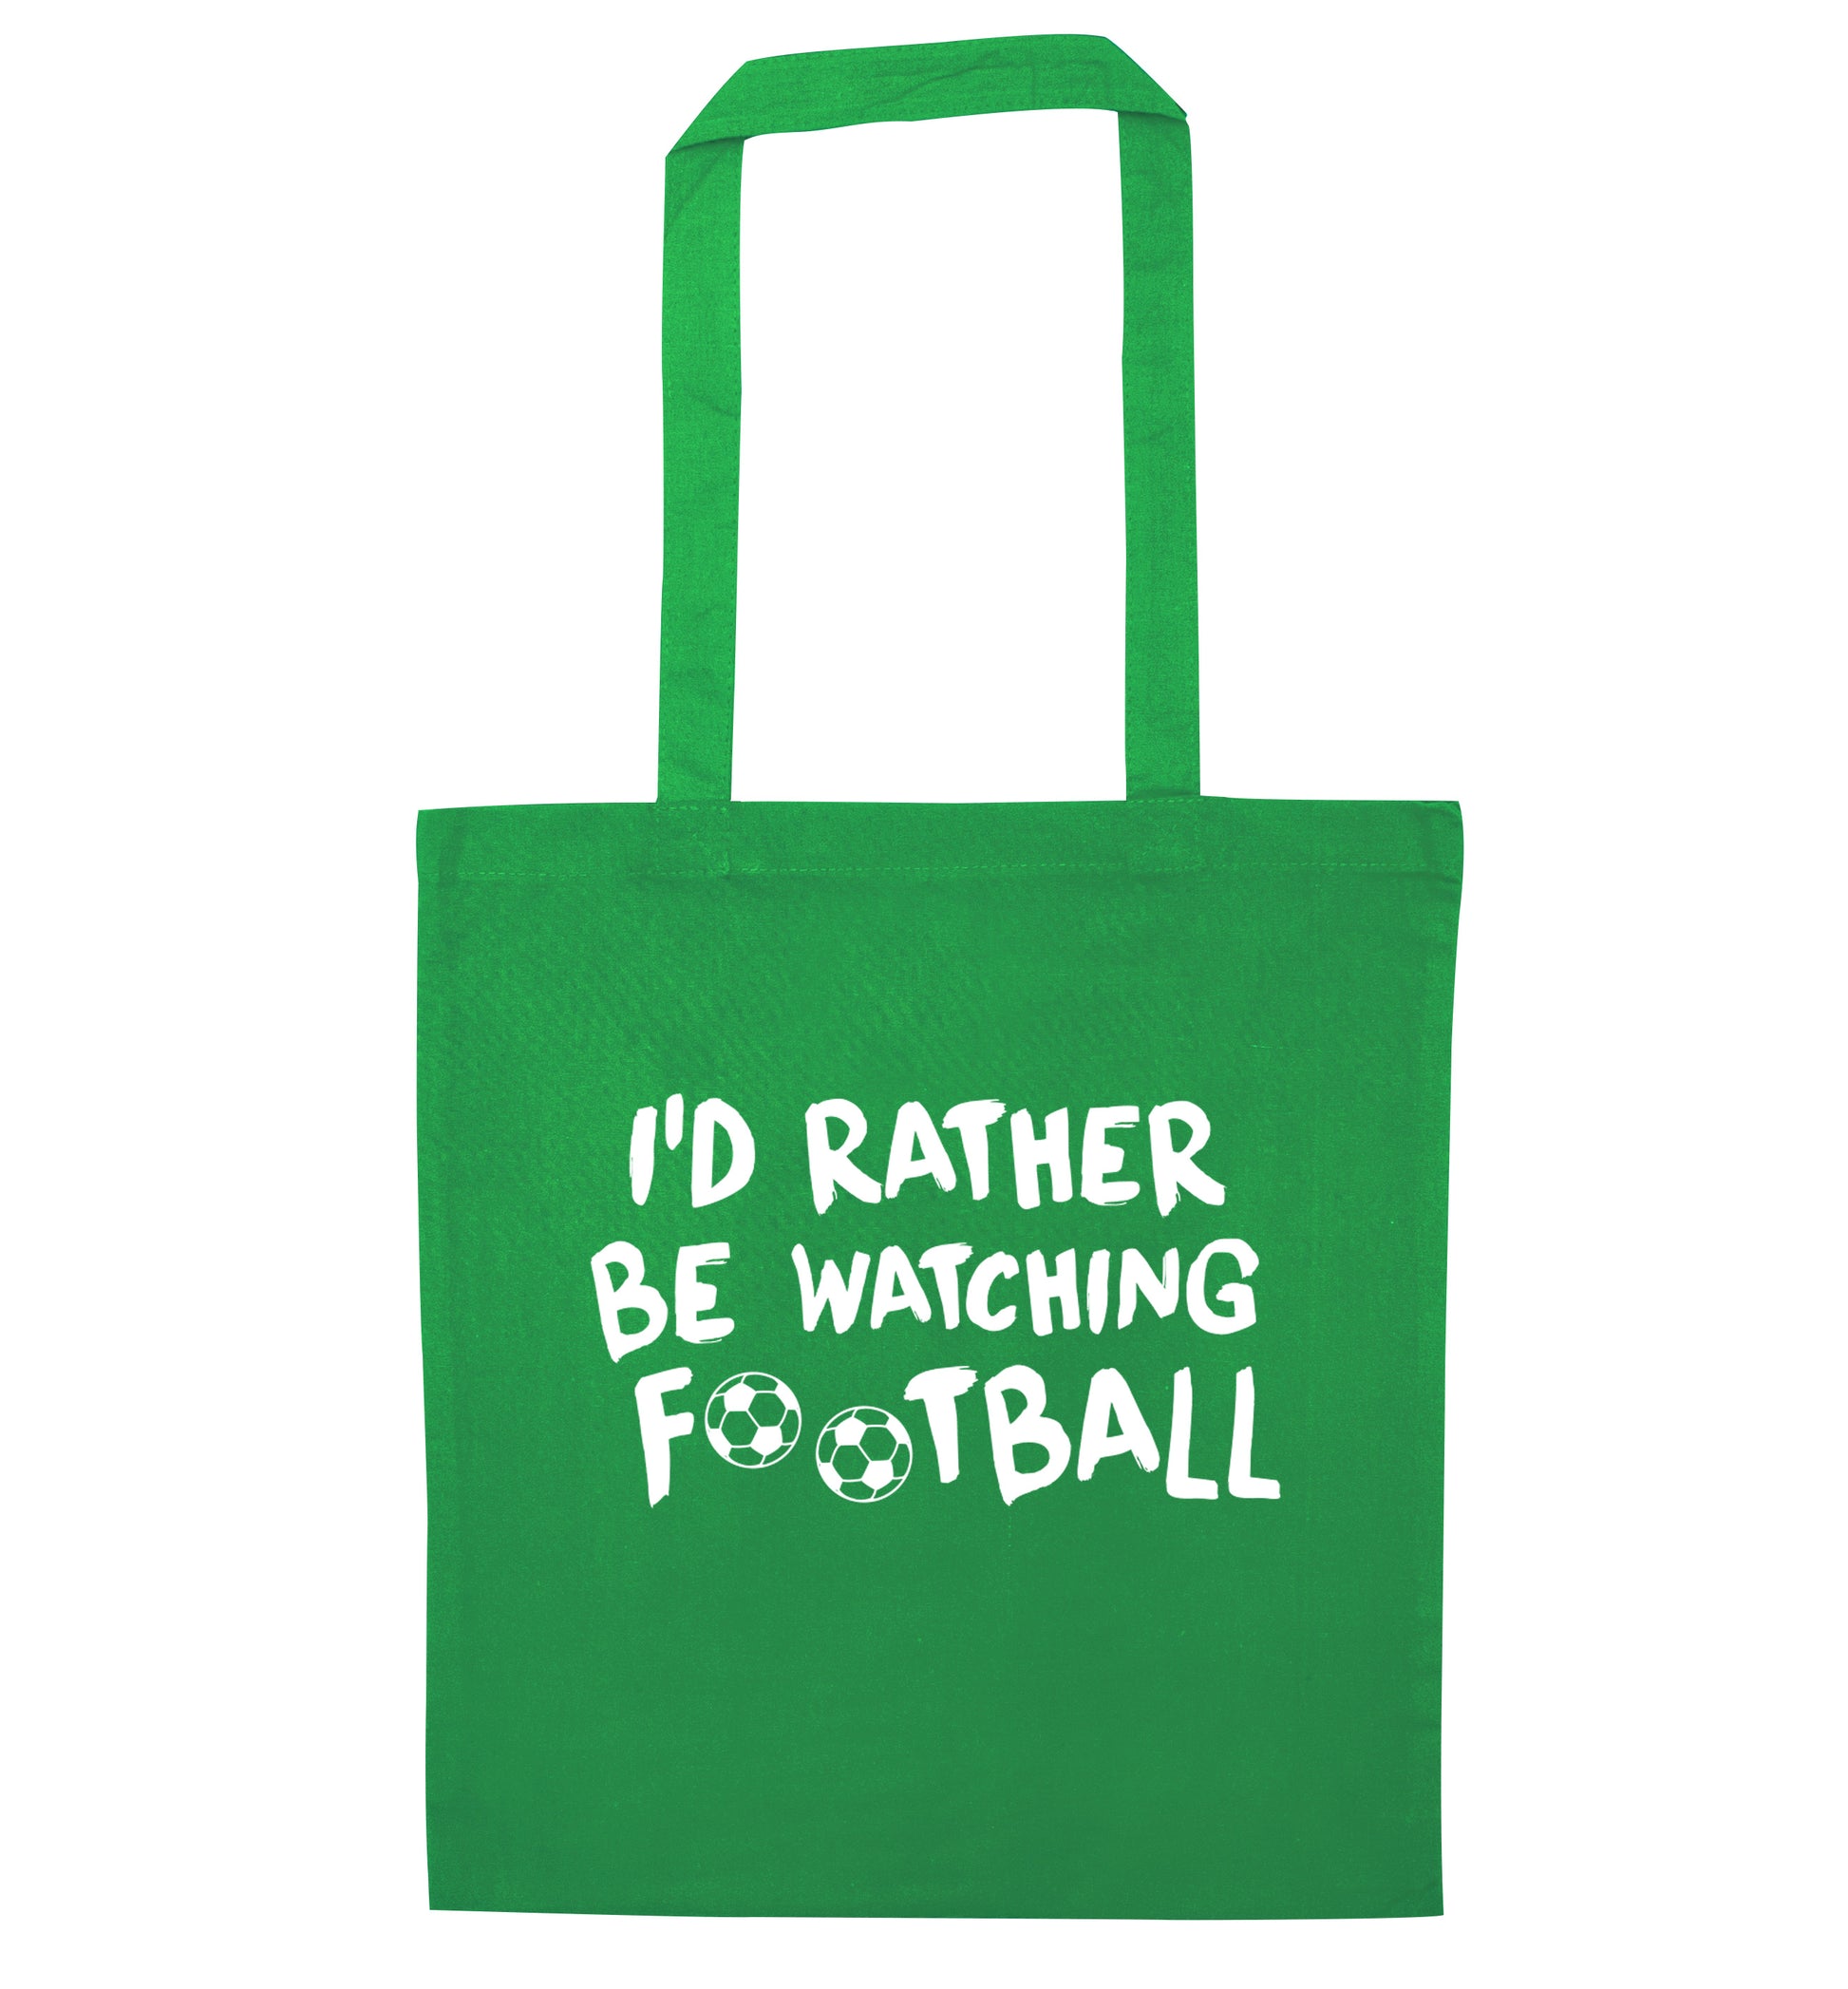 I'd rather be watching football green tote bag